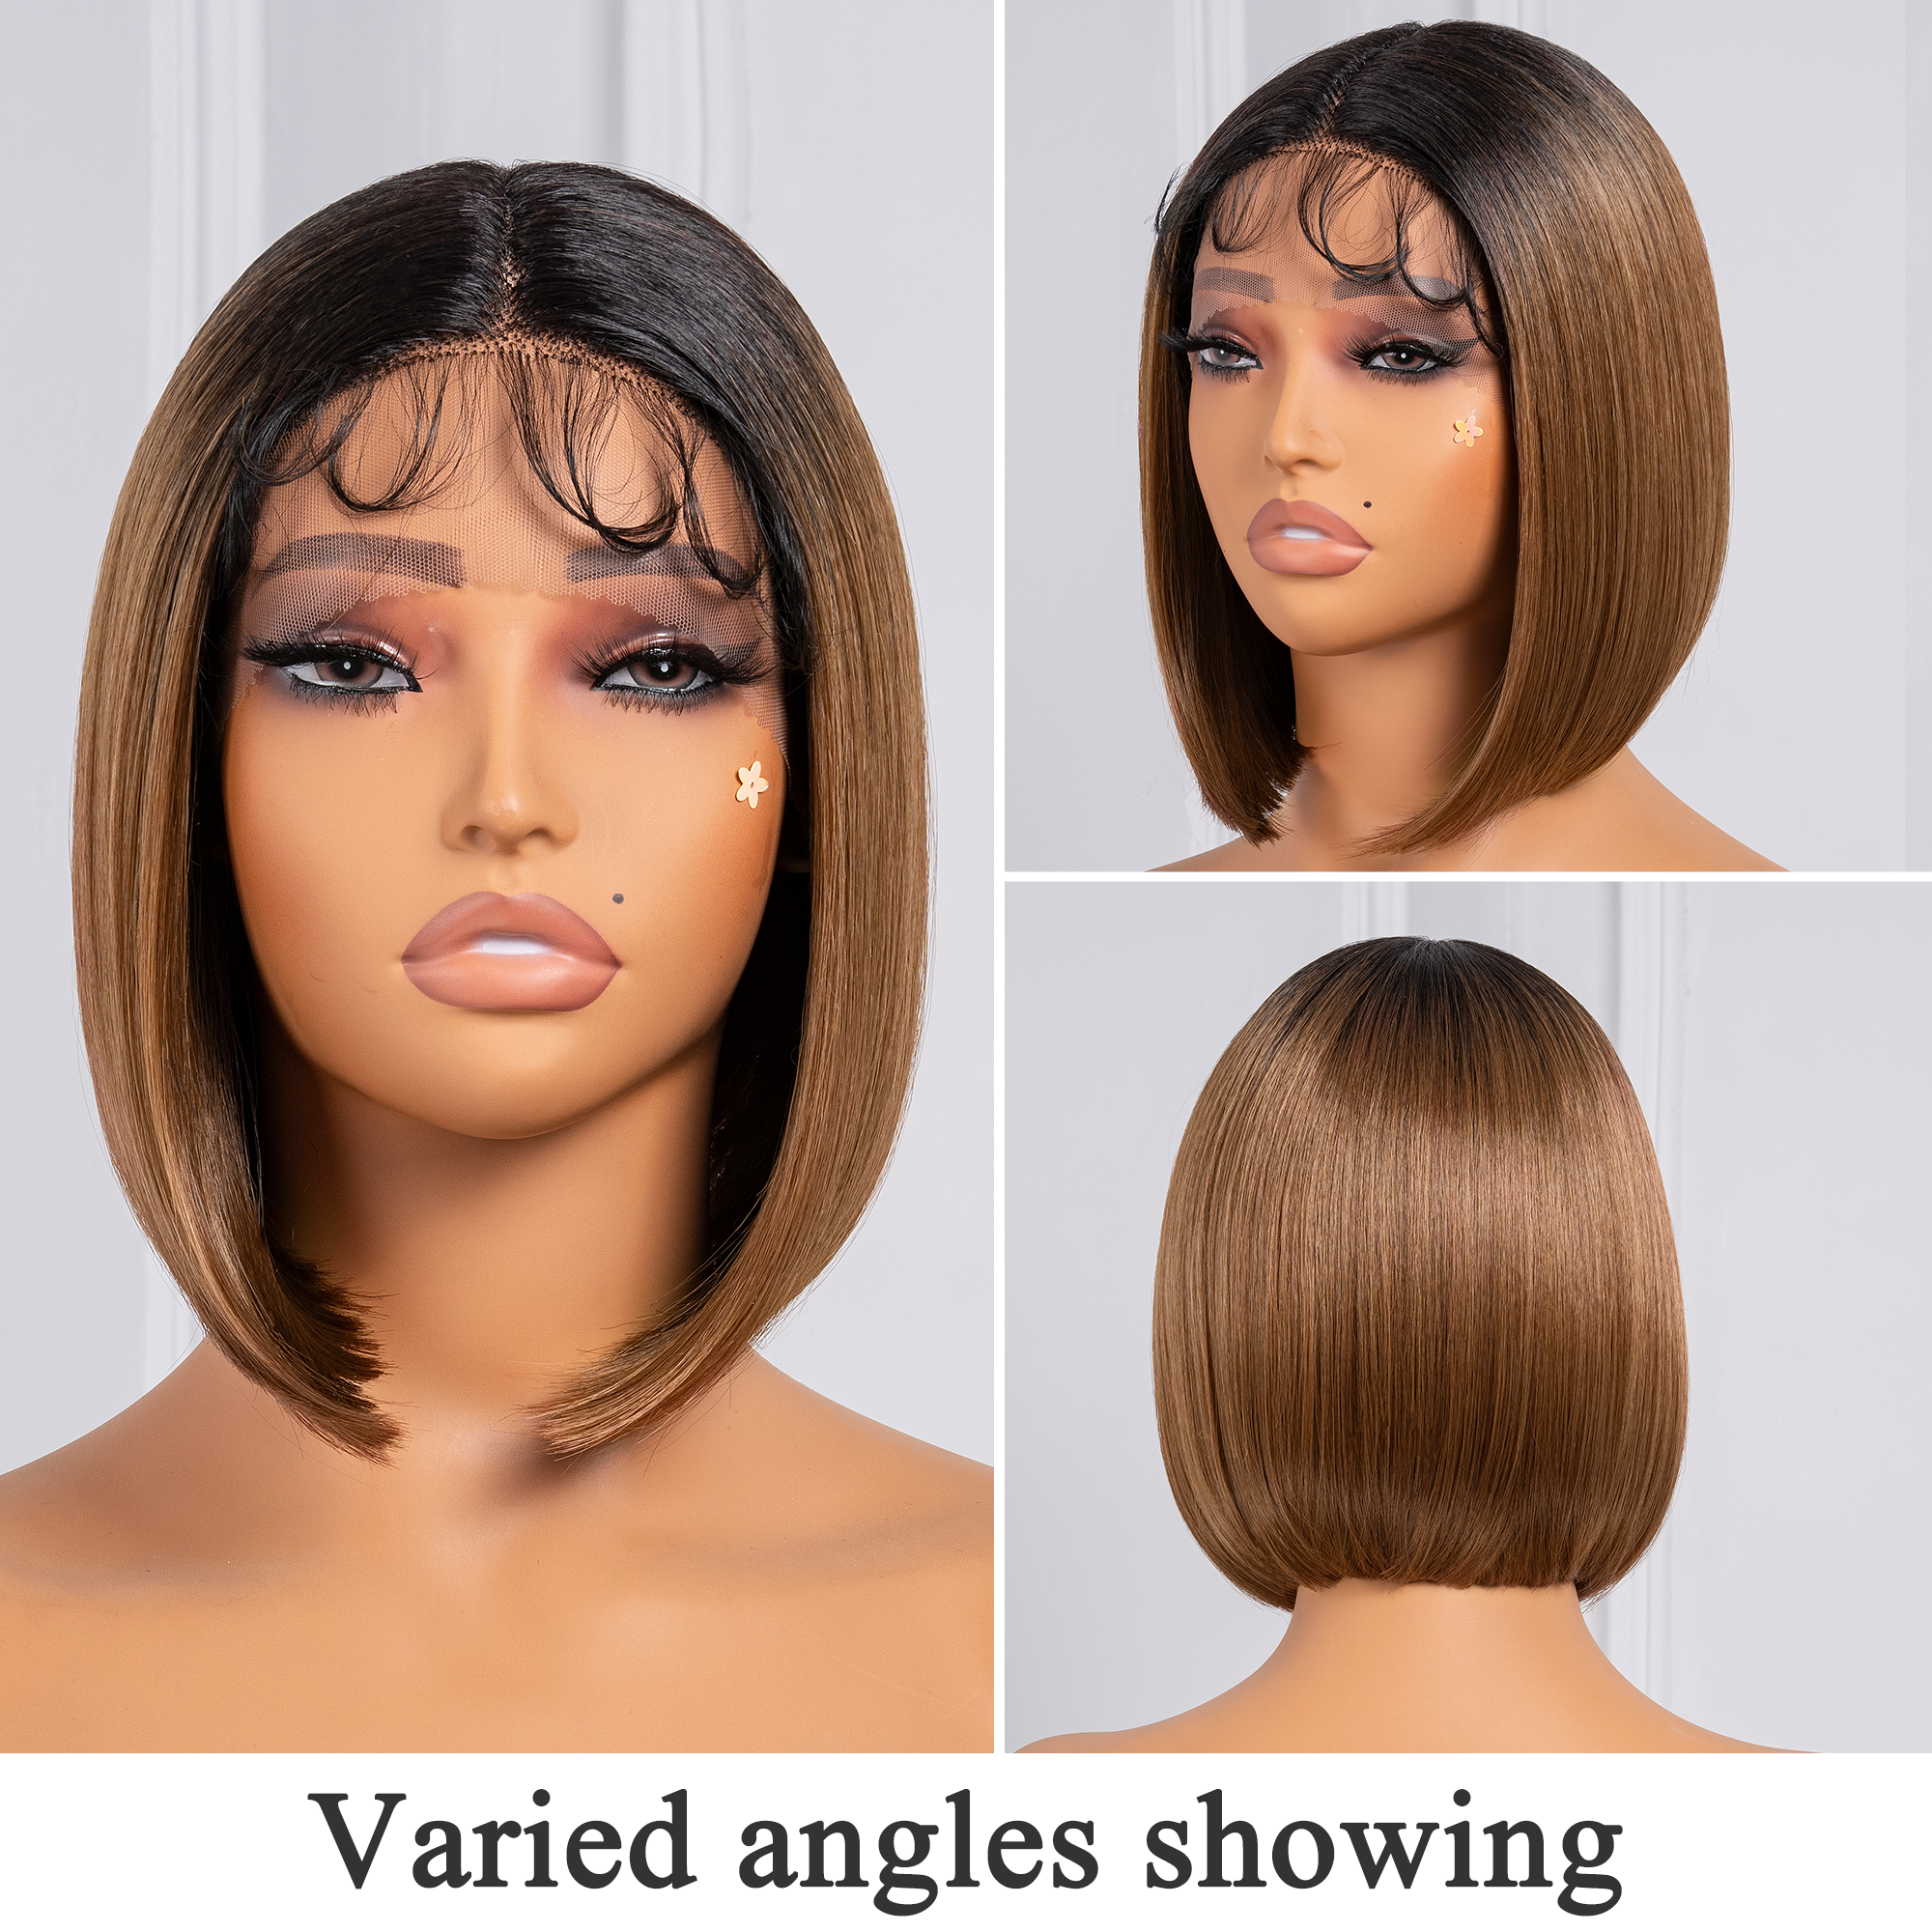 TOYOTRESS AIRY YAKI STRAIGHT T-MIDDLE PART LACE FRONT WIGS WITH BABY HAIR - 10 INCH BOB HUMAN HAIR RIVAL WIG OMBRE BROWN WITH BLACK ROOTS WIG(1027）